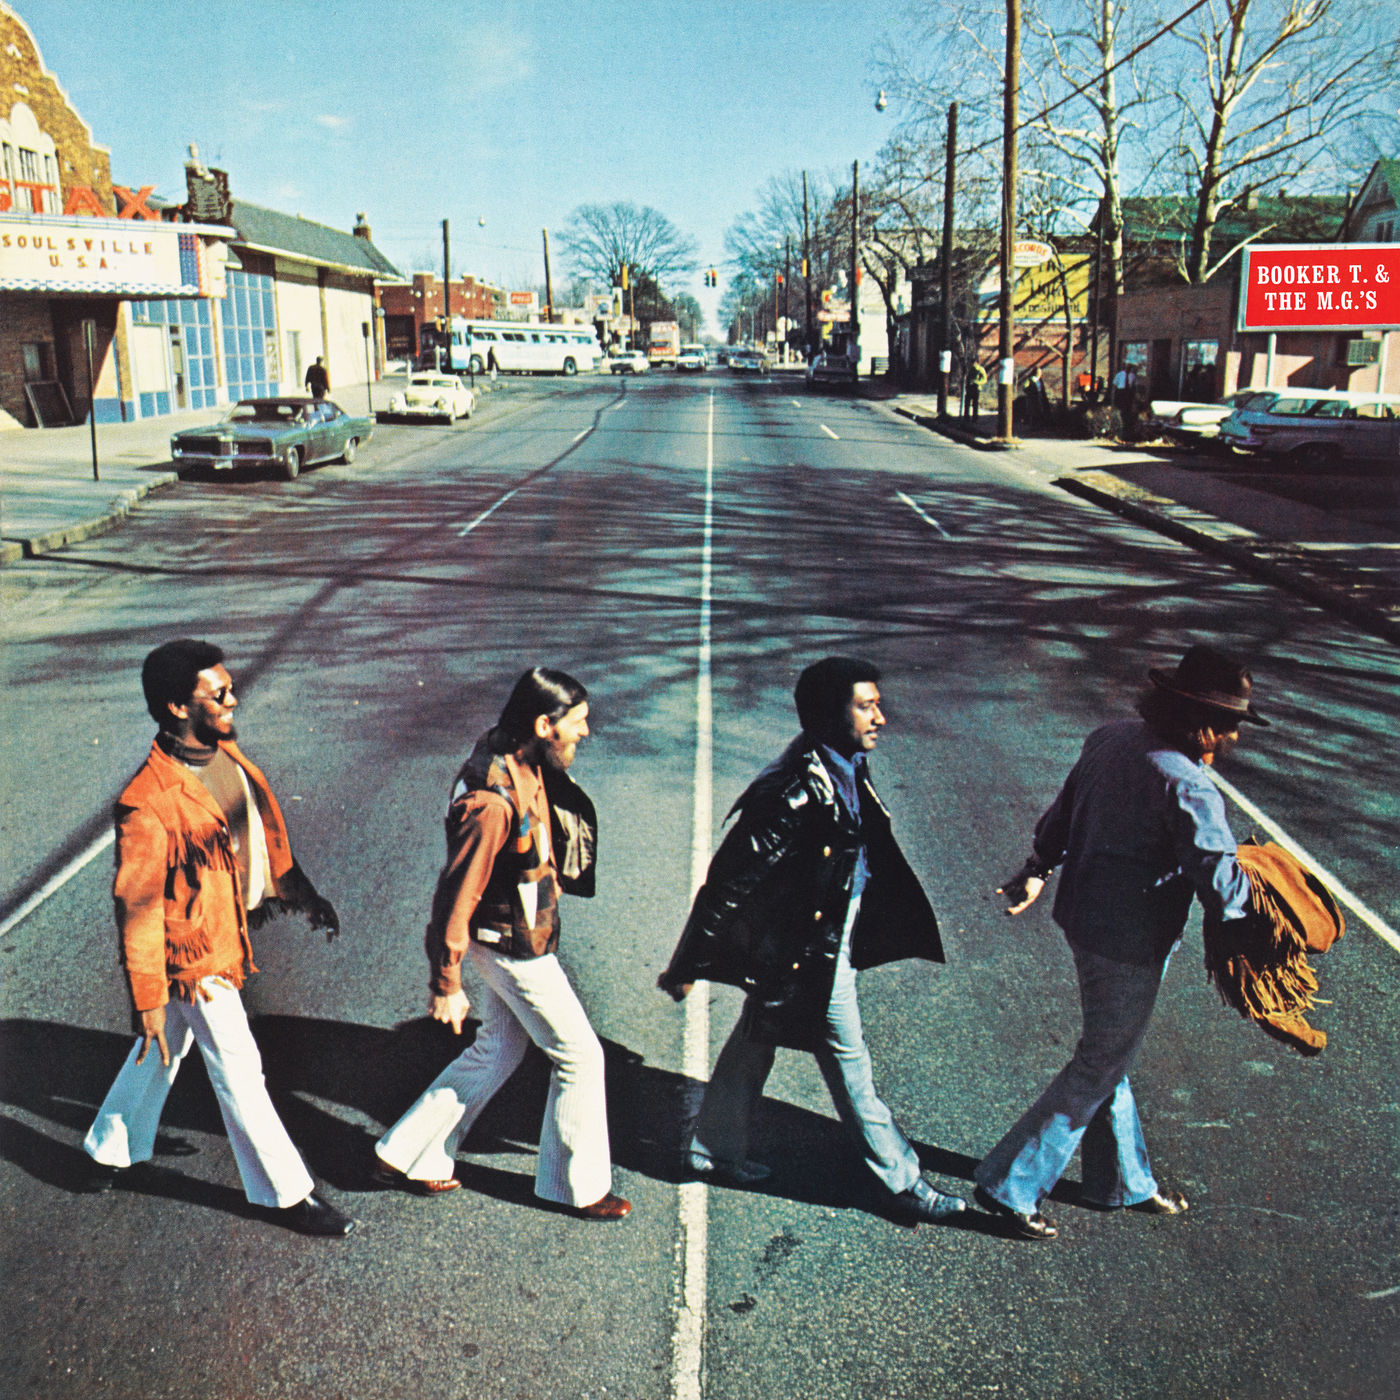 Booker T. & The M.G.’s – McLemore Avenue (Remastered) (1970/2020) [FLAC 24bit/192kHz]